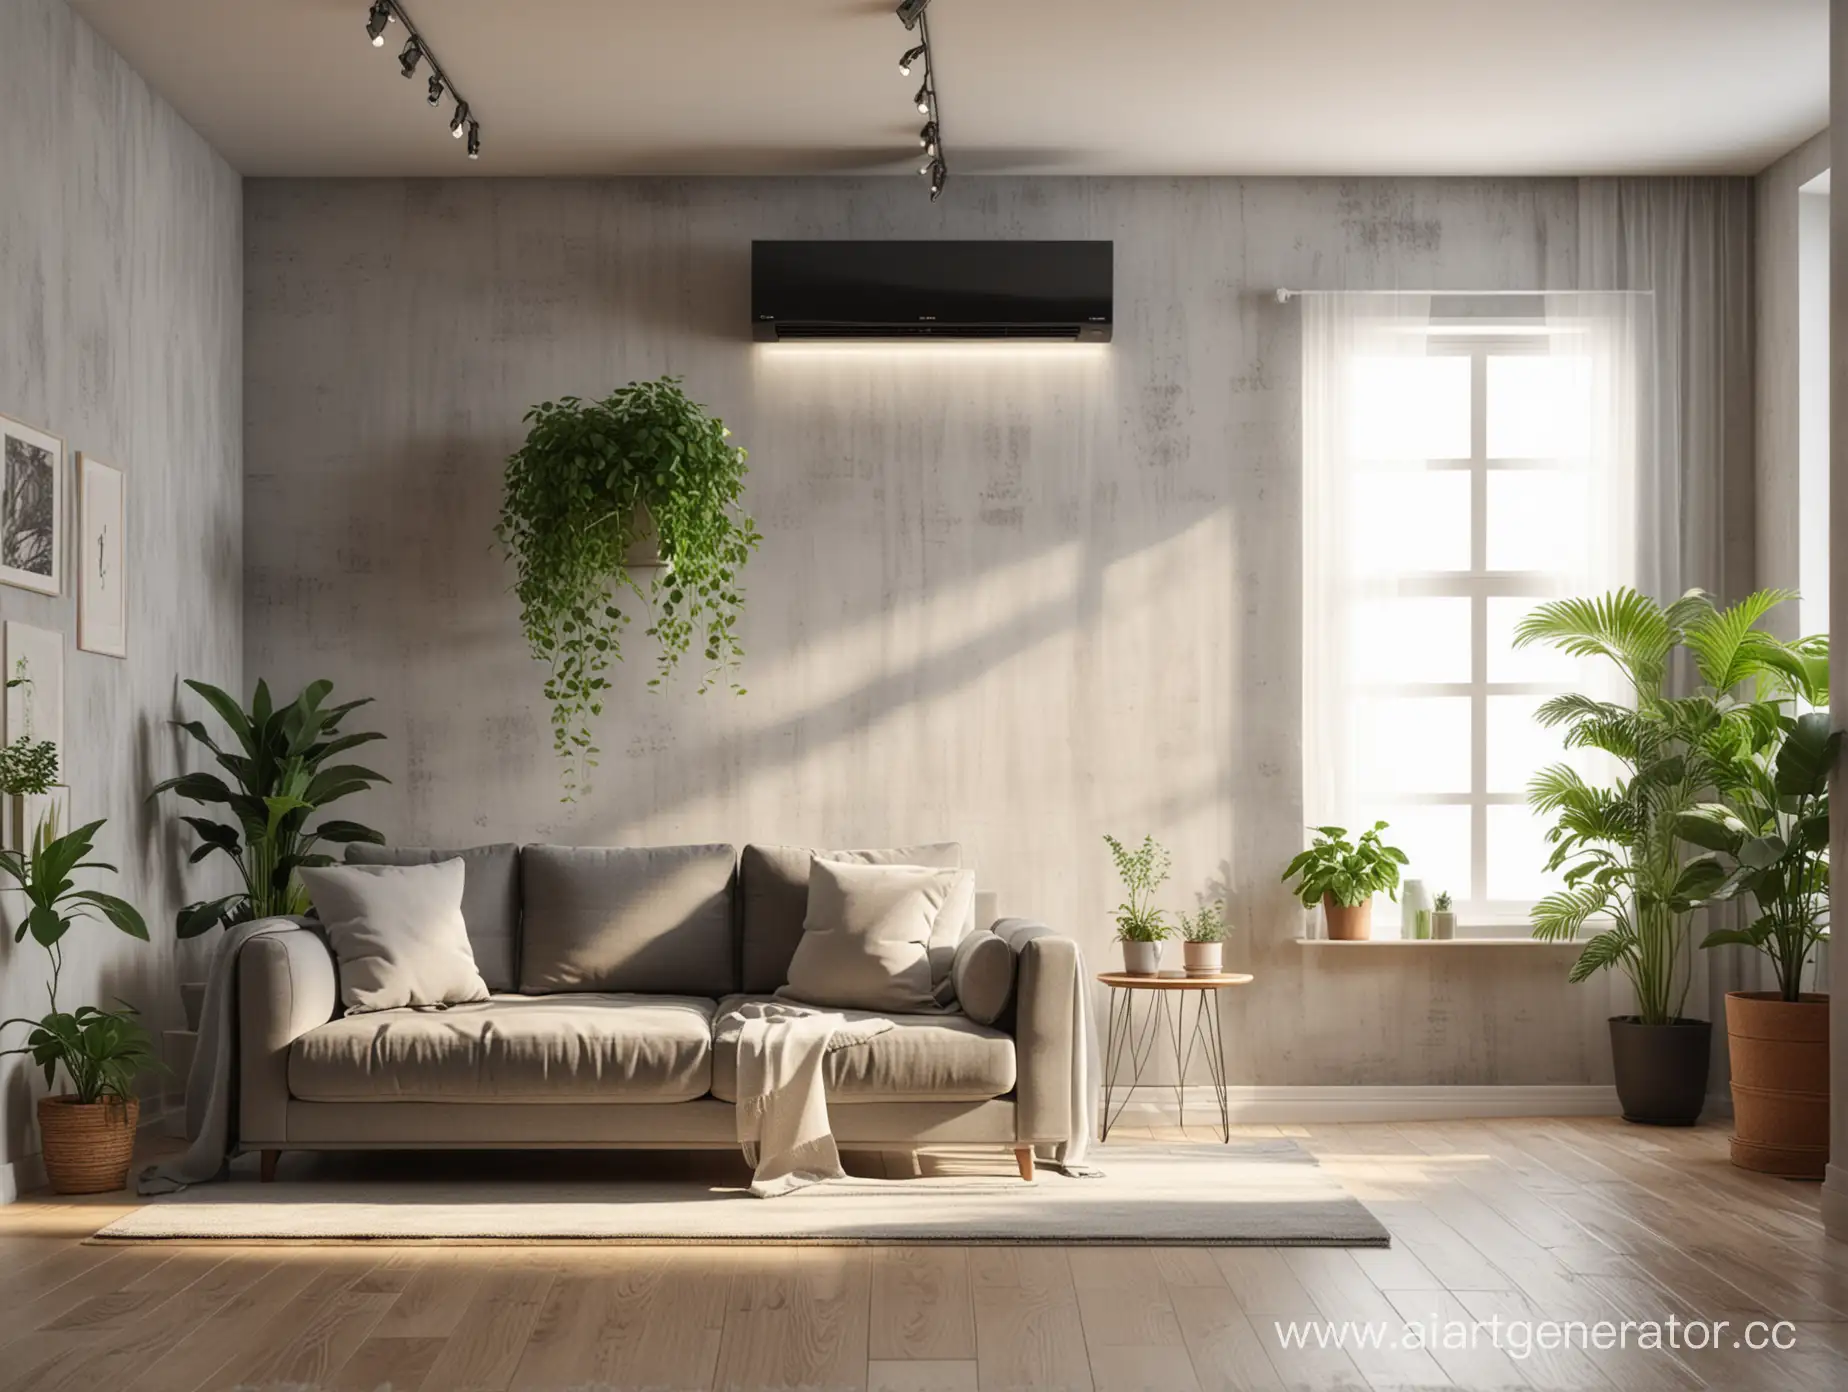 Contemporary-Living-Room-with-Gray-Sofa-Black-Air-Conditioner-and-Green-Plants